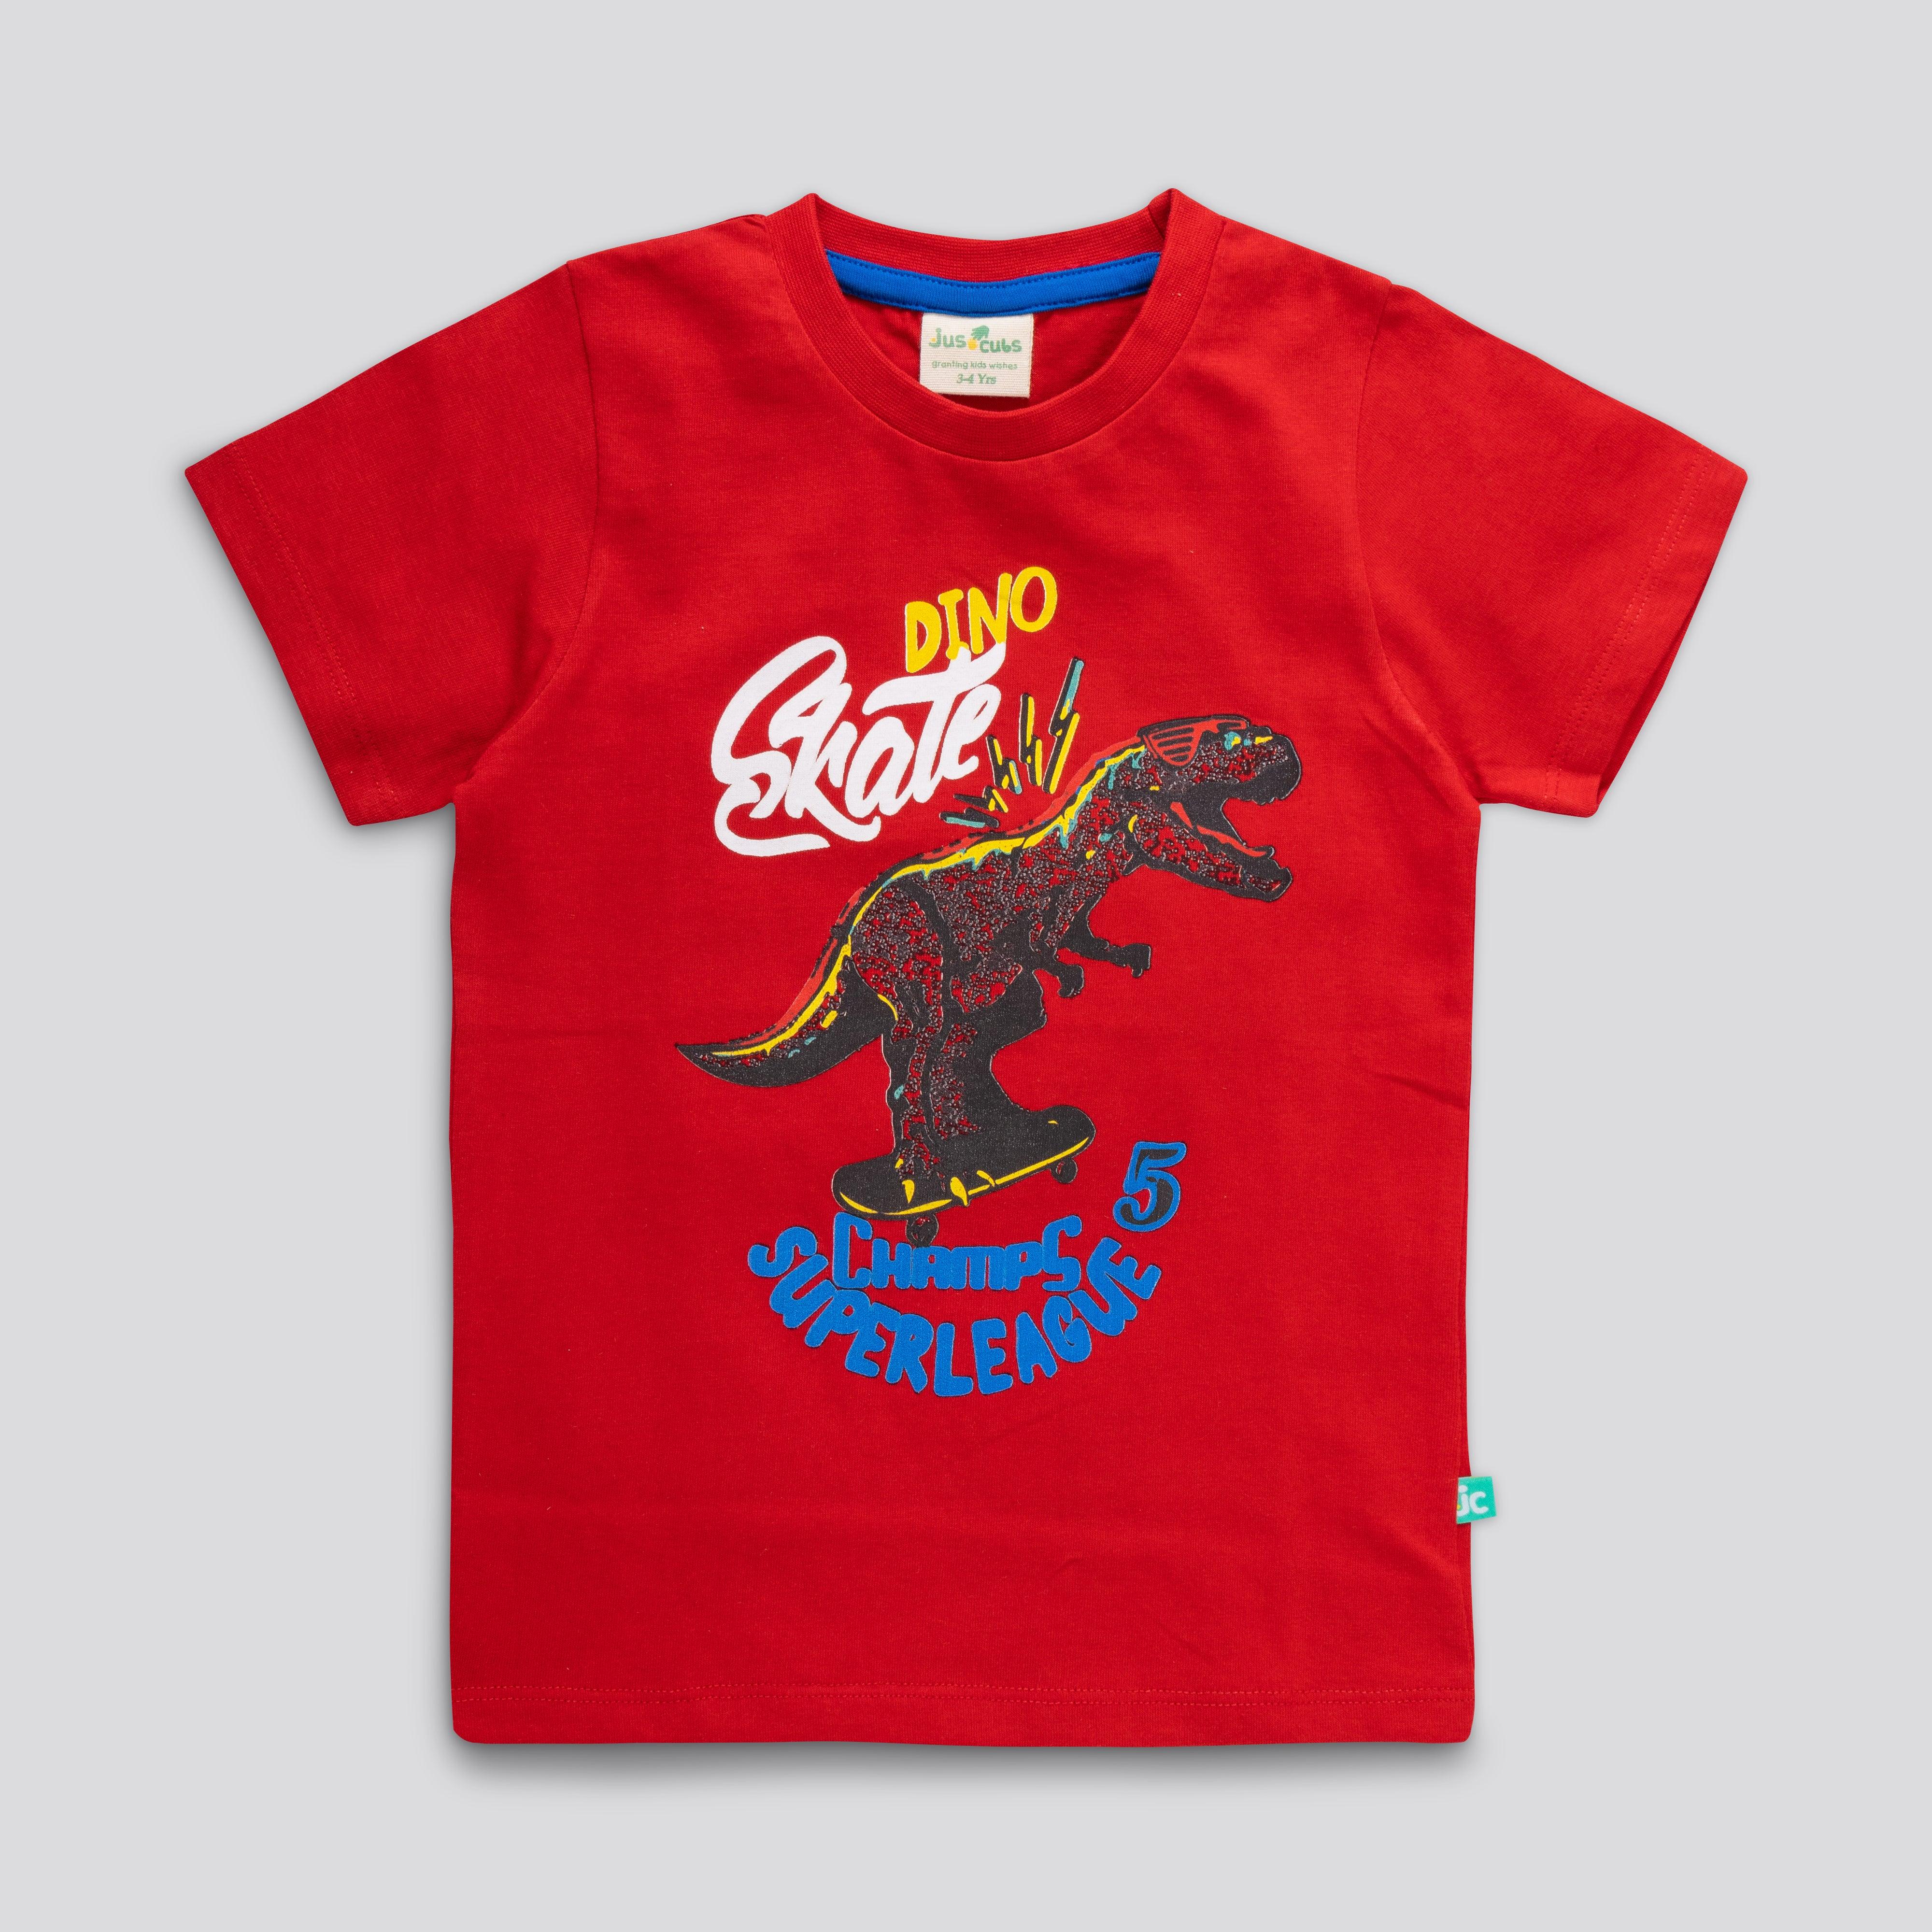 YOUNG BOYS DINO GRAPHIC PRINTED T SHIRT - Juscubs